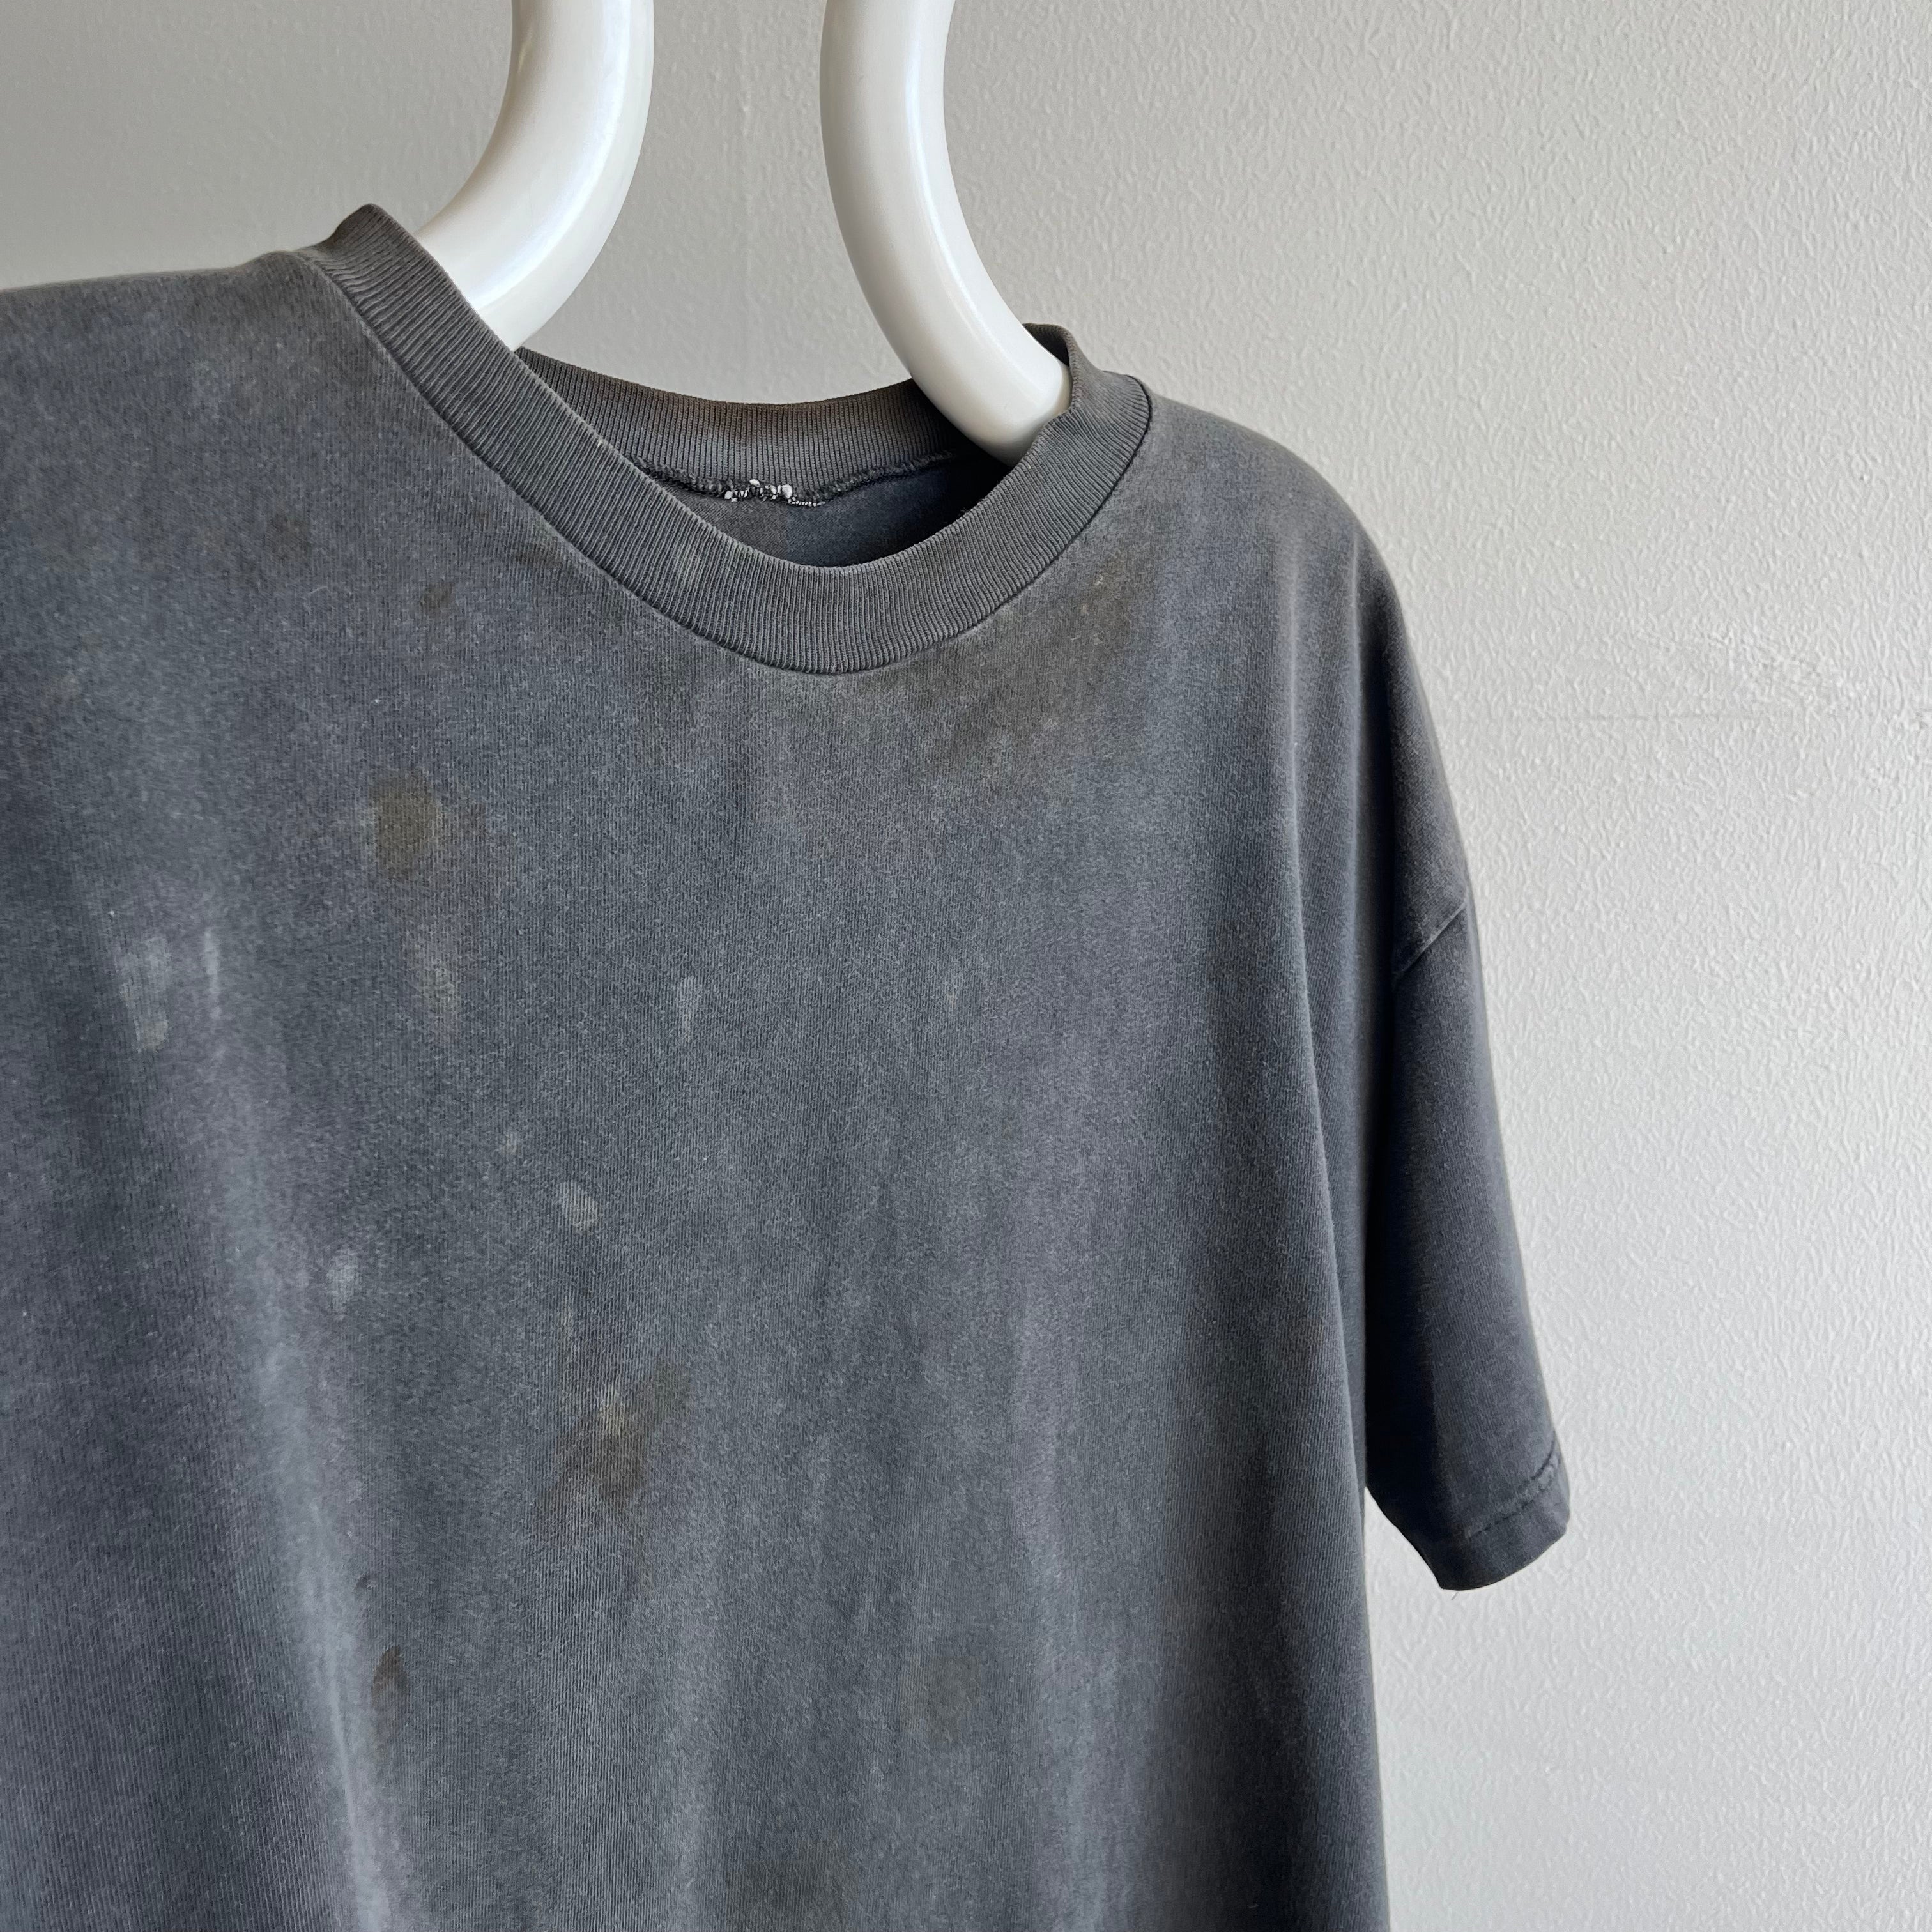 1990s Super Age Stained and Faded Blank Black Boxy Cotton T-Shirt